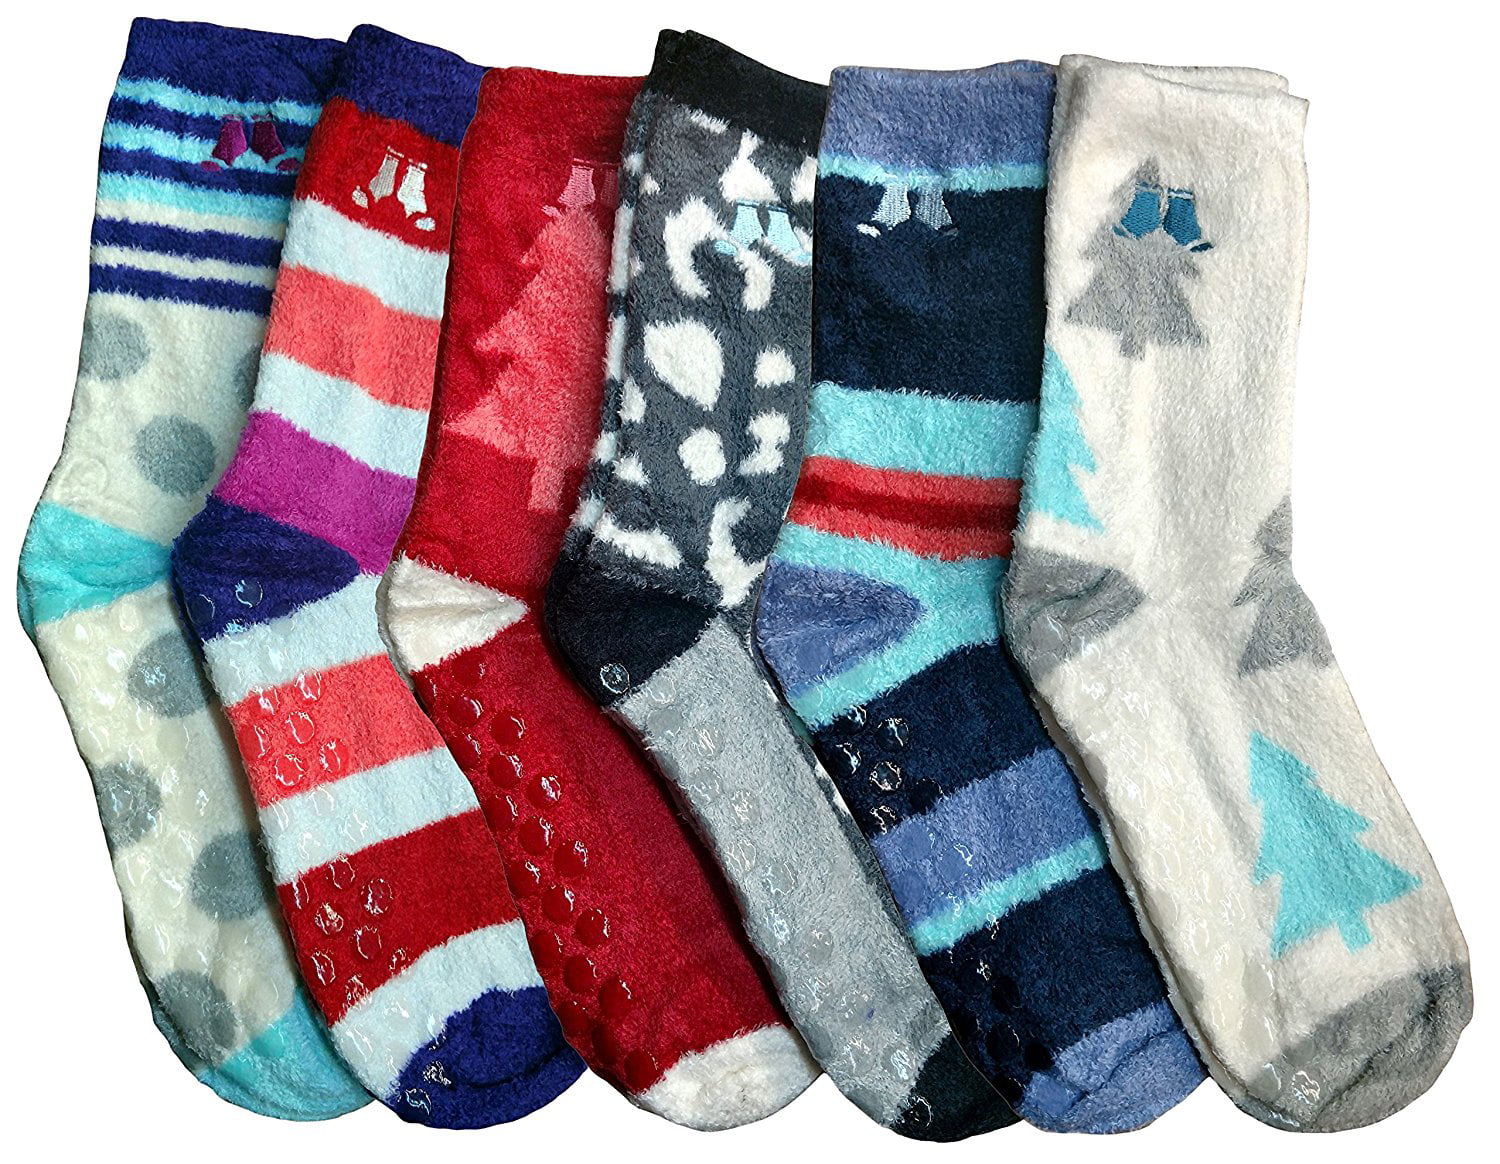 Women's 6 Pairs Patterned & Solid Anti-Skid Soft Fuzzy Quarter Socks 